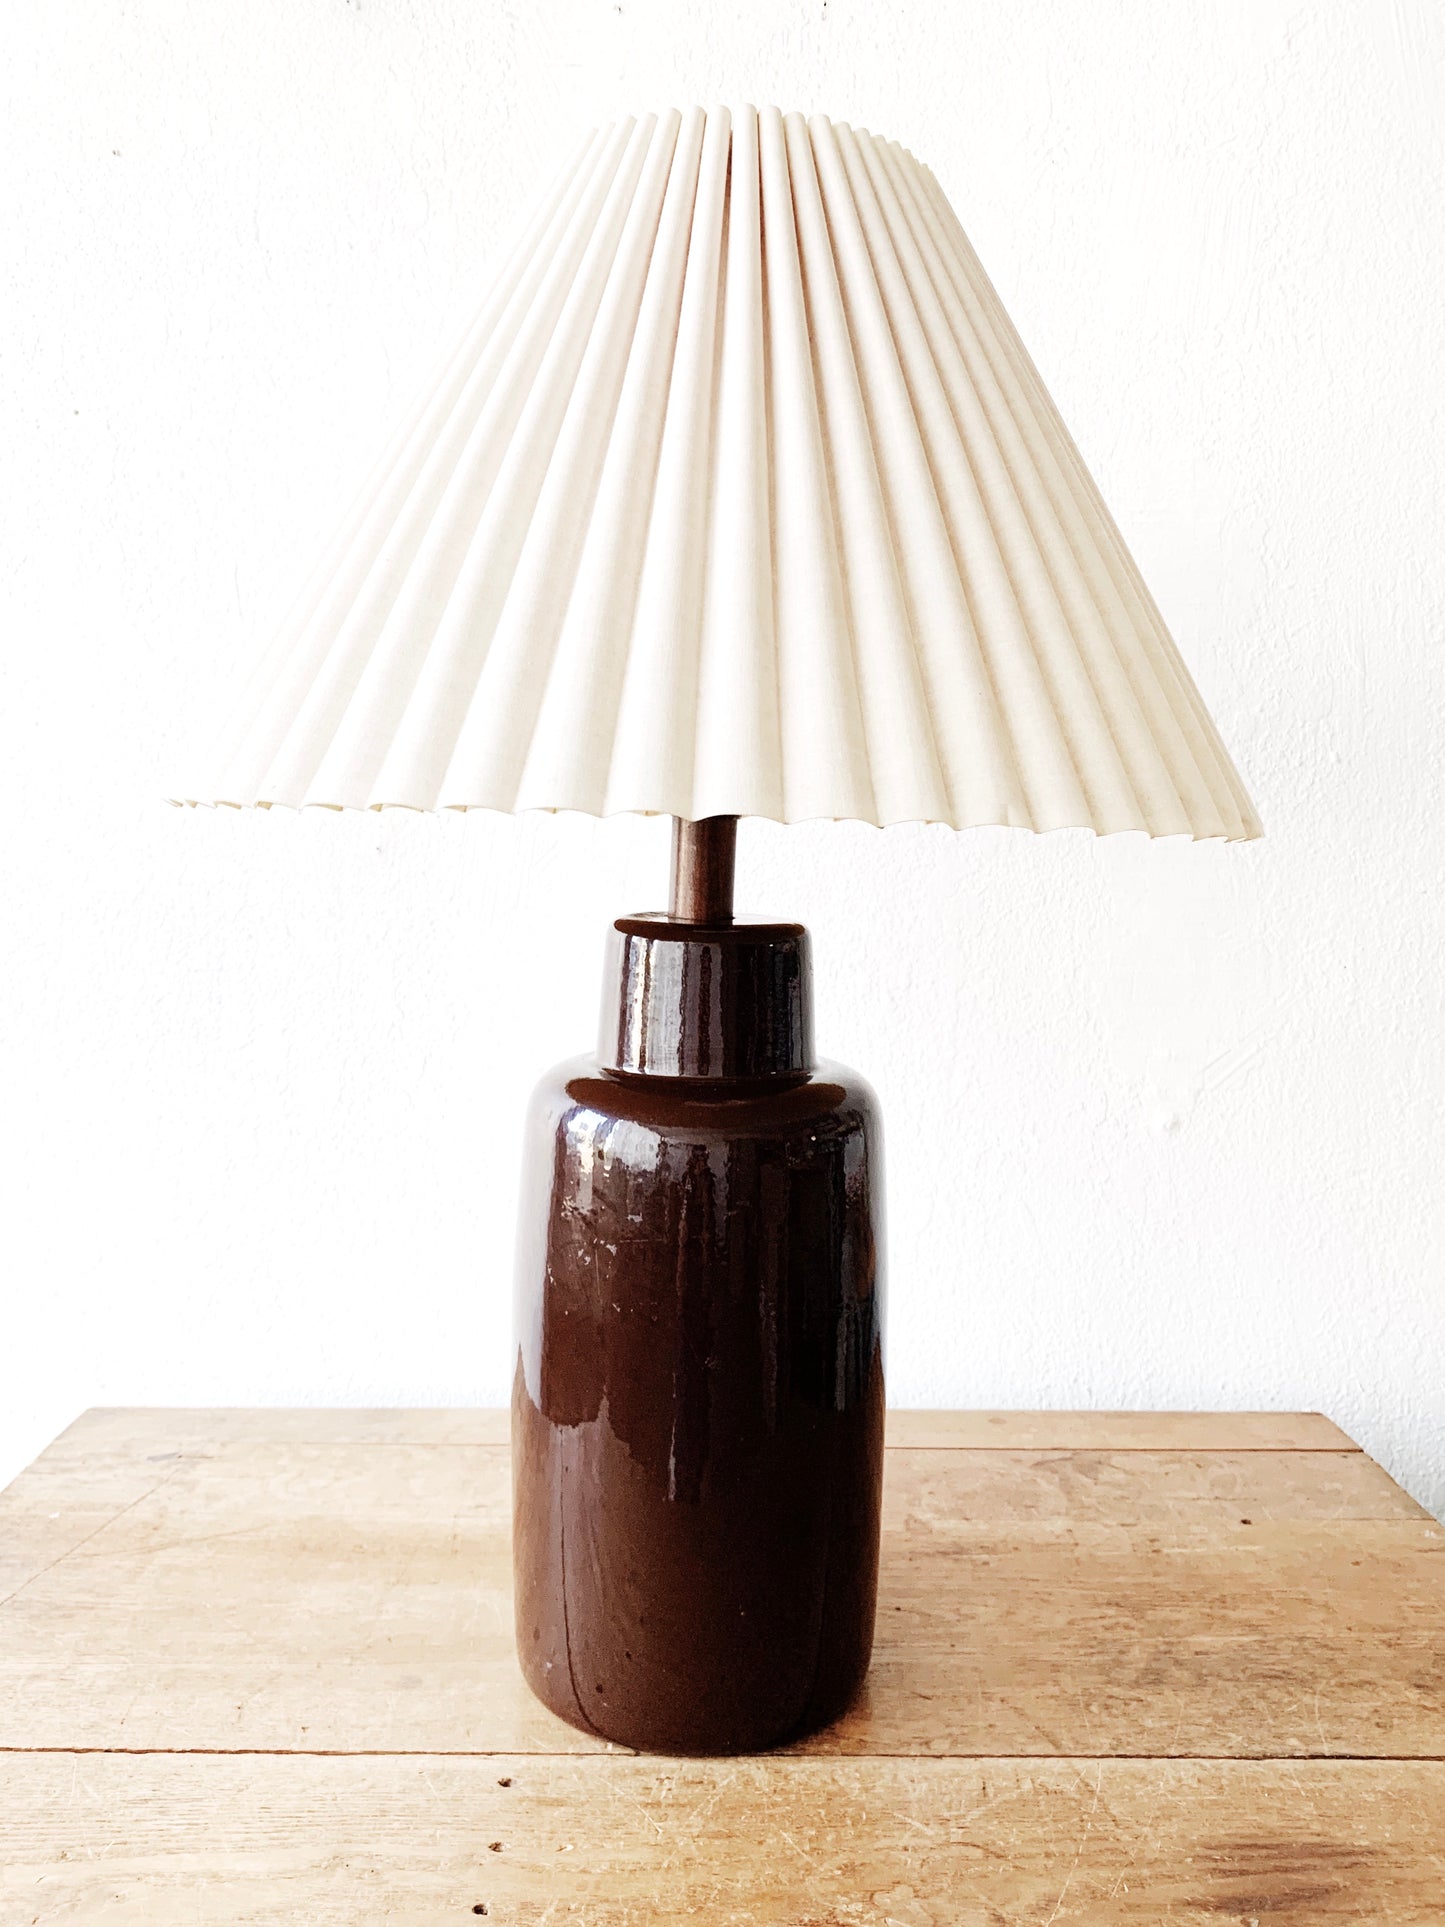 Vintage Ceramic Lamp and Pleated Shade